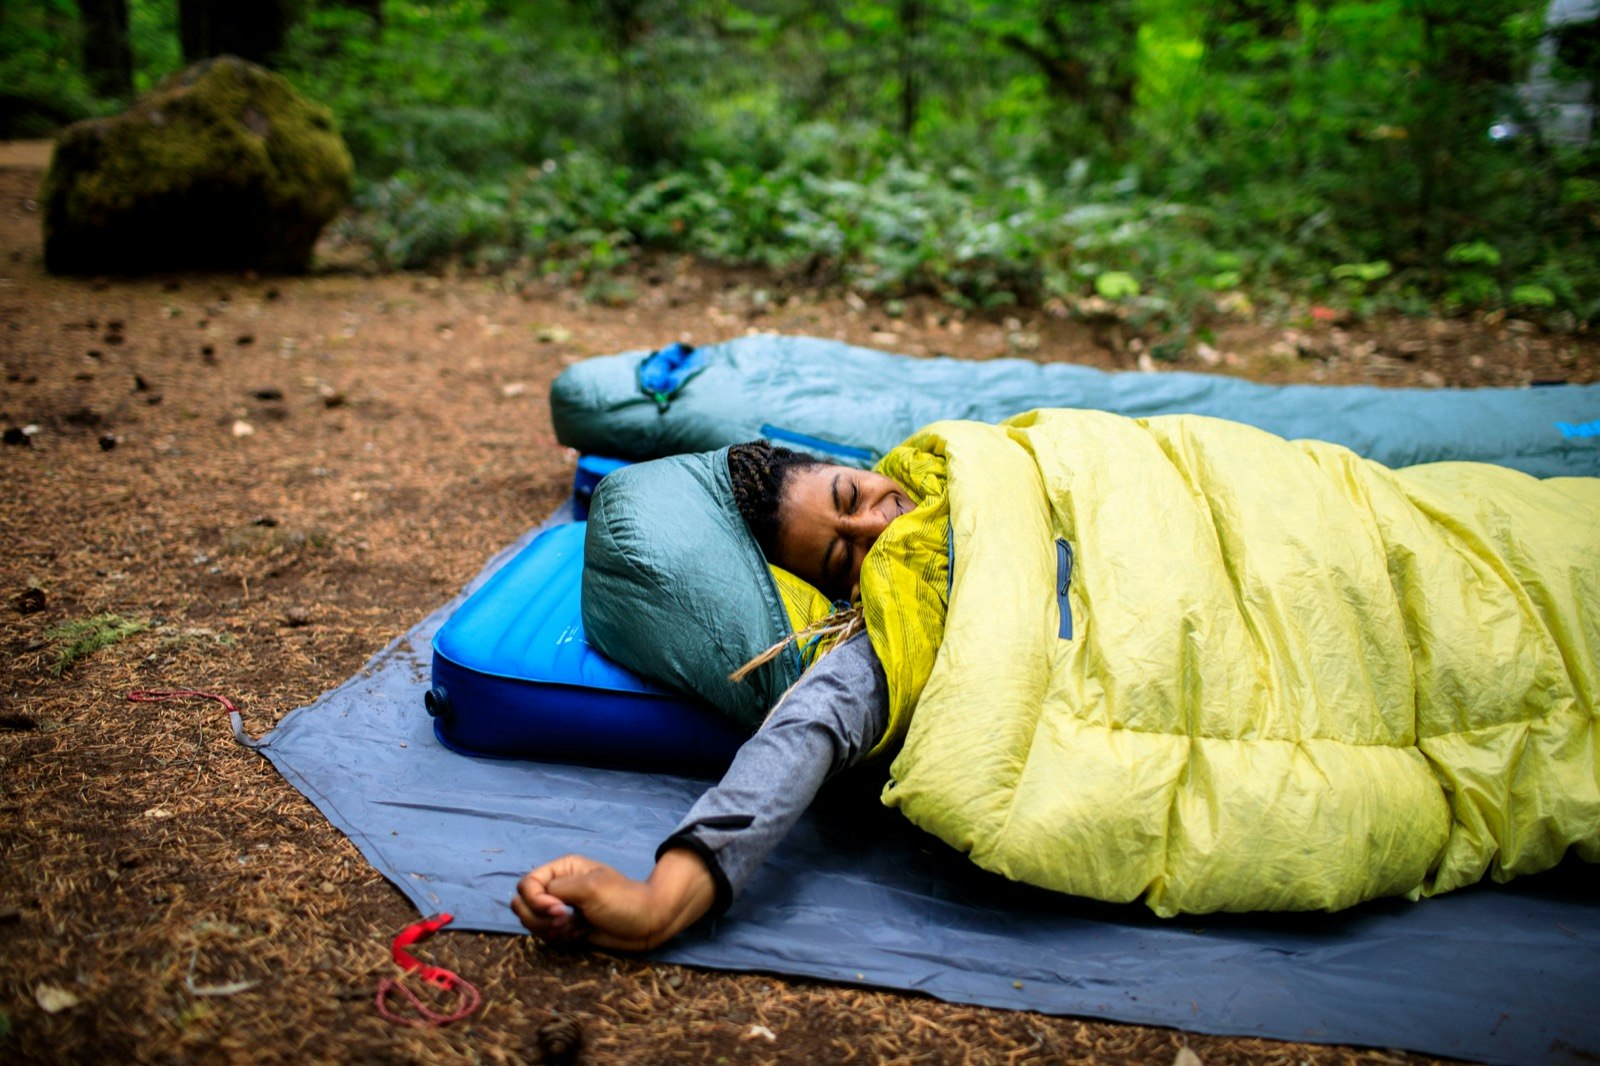 A woman stretches from inside a sleeping bag